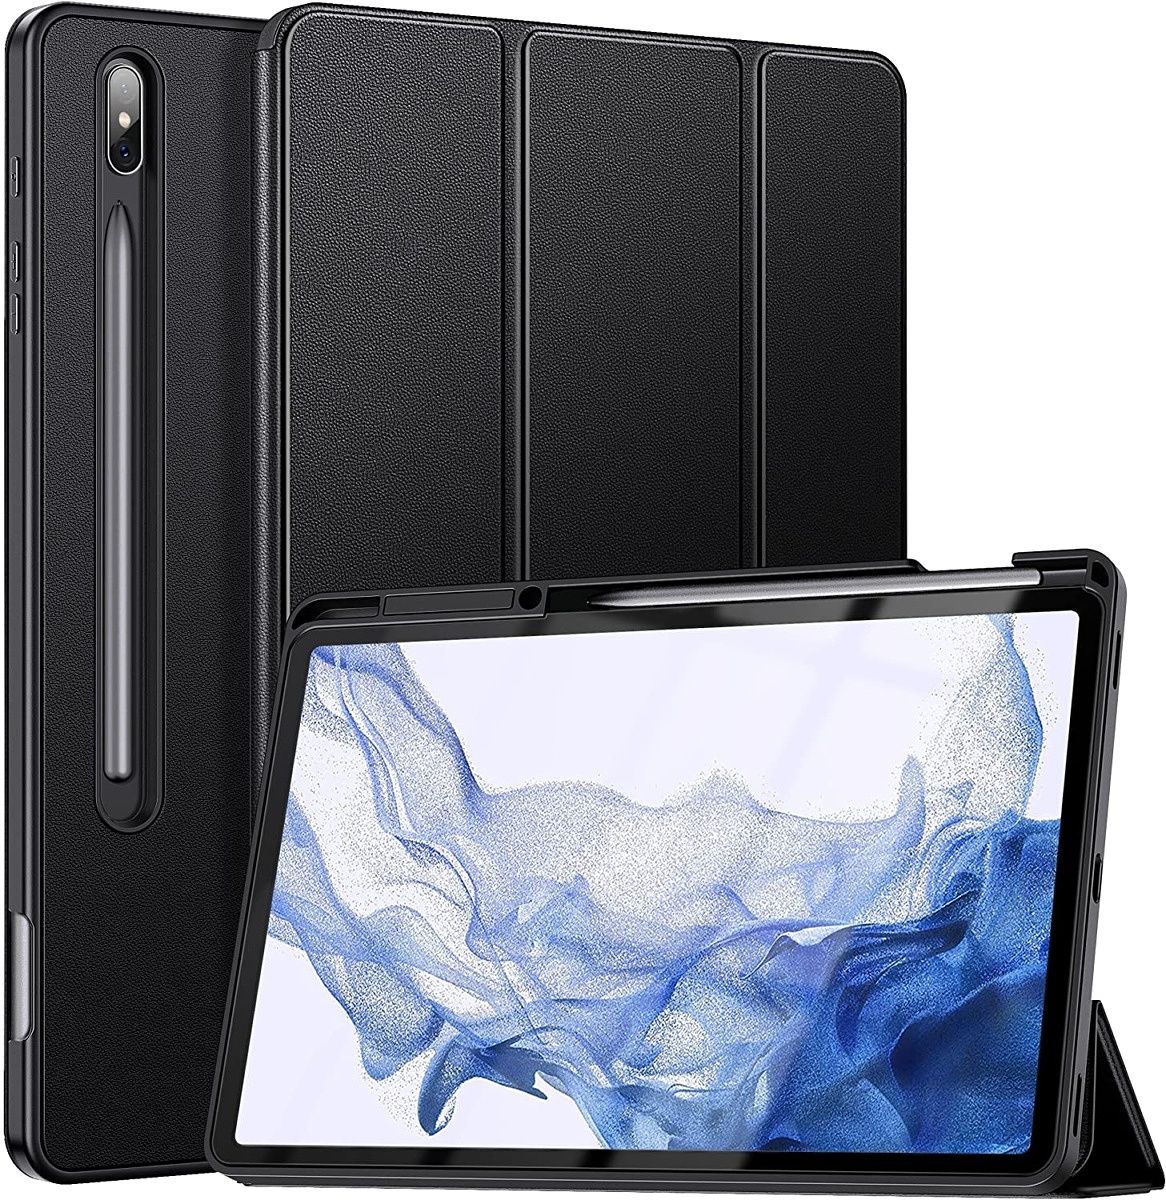 This affordable smart case is available in two colors, has an S Pen holder, and supports two viewing angles. It has a formal vibe to it, as well.